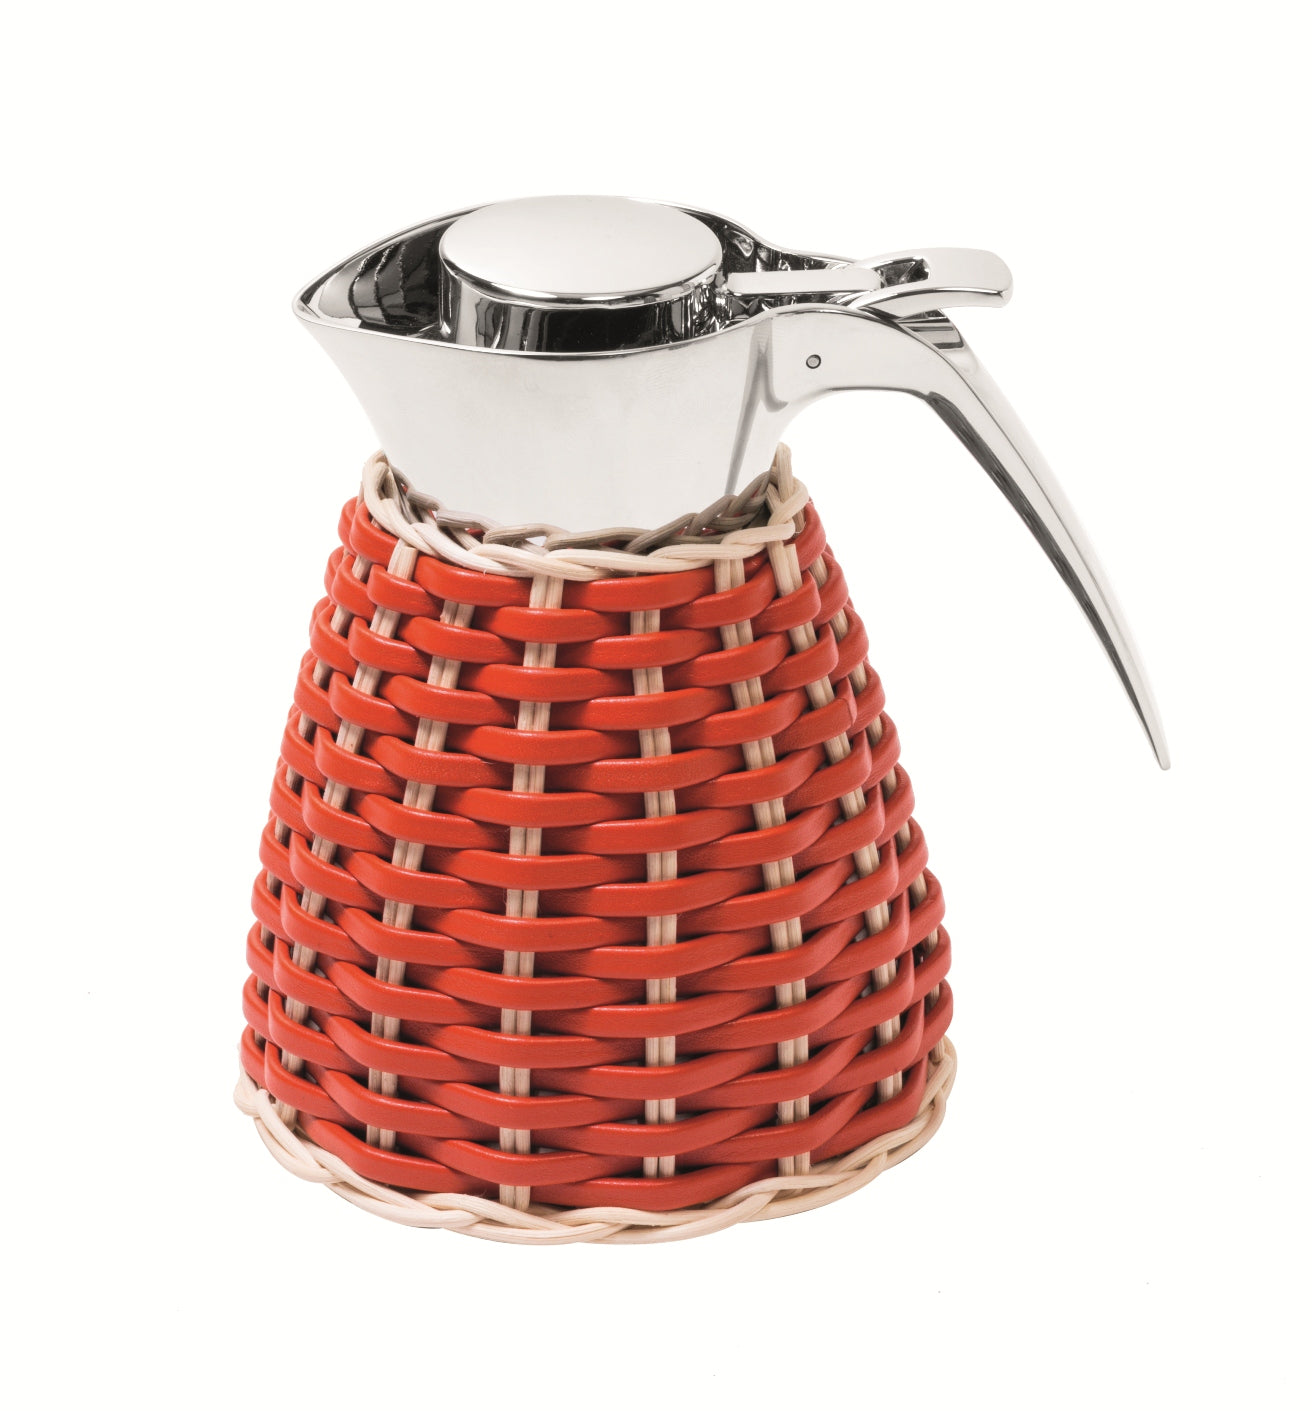 Vincennes Leather & Rattan Carafe by Pigment France | Insulated stainless steel carafe partially covered in woven leather and rattan with chrome-plated finish. Two-chamber structure maintains liquid temperatures. Precise pouring with specially developed hinged lid for one-hand operation. | Tableware and Drinkware | 2Jour Concierge, your luxury lifestyle shop